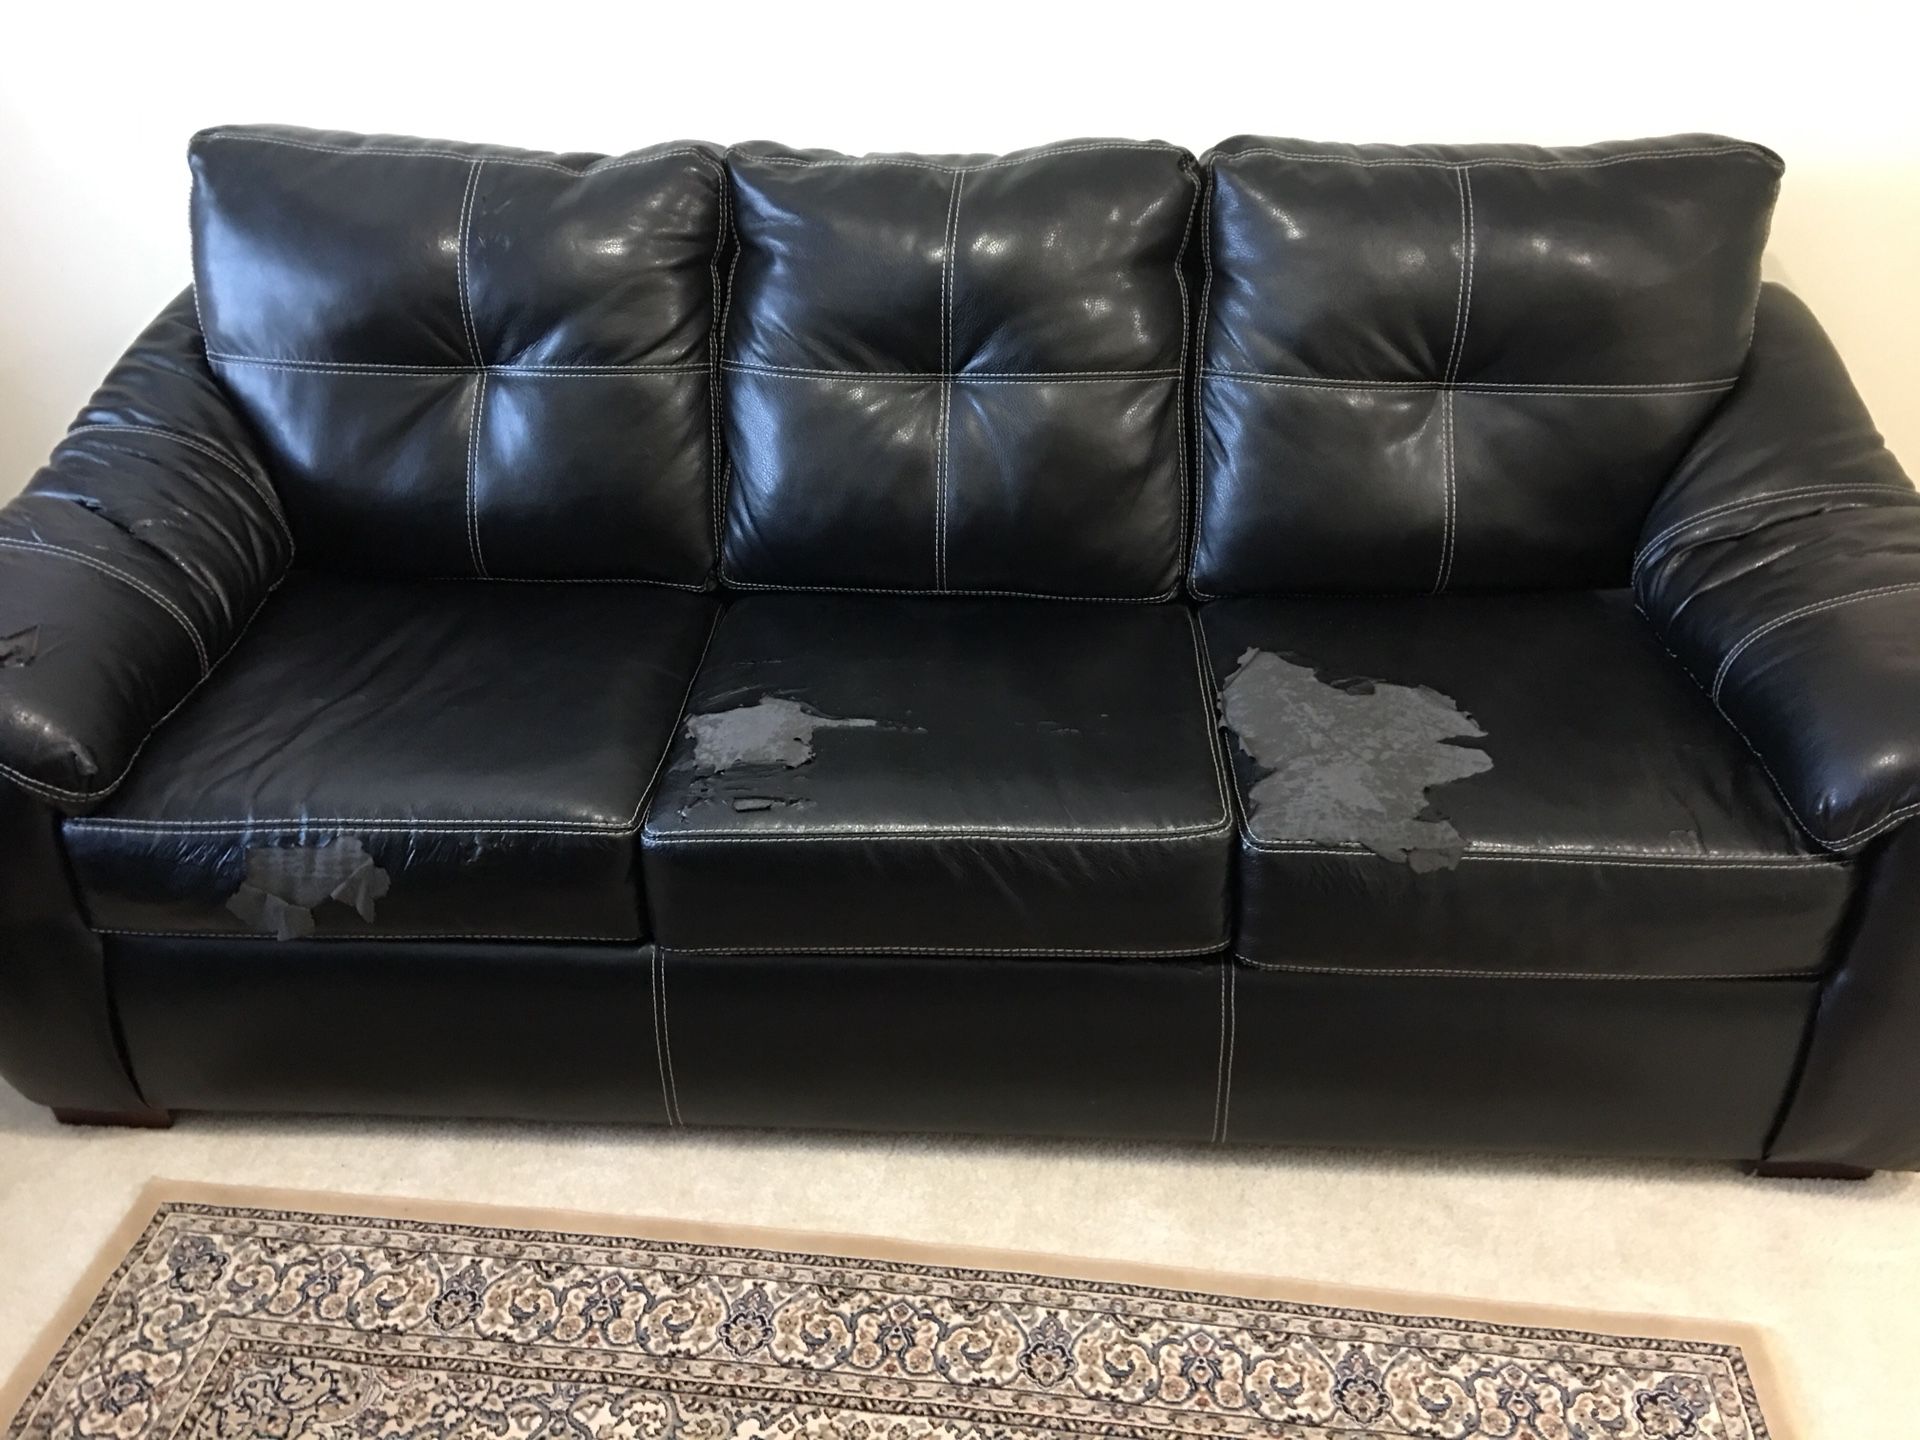 Free couch, see picture